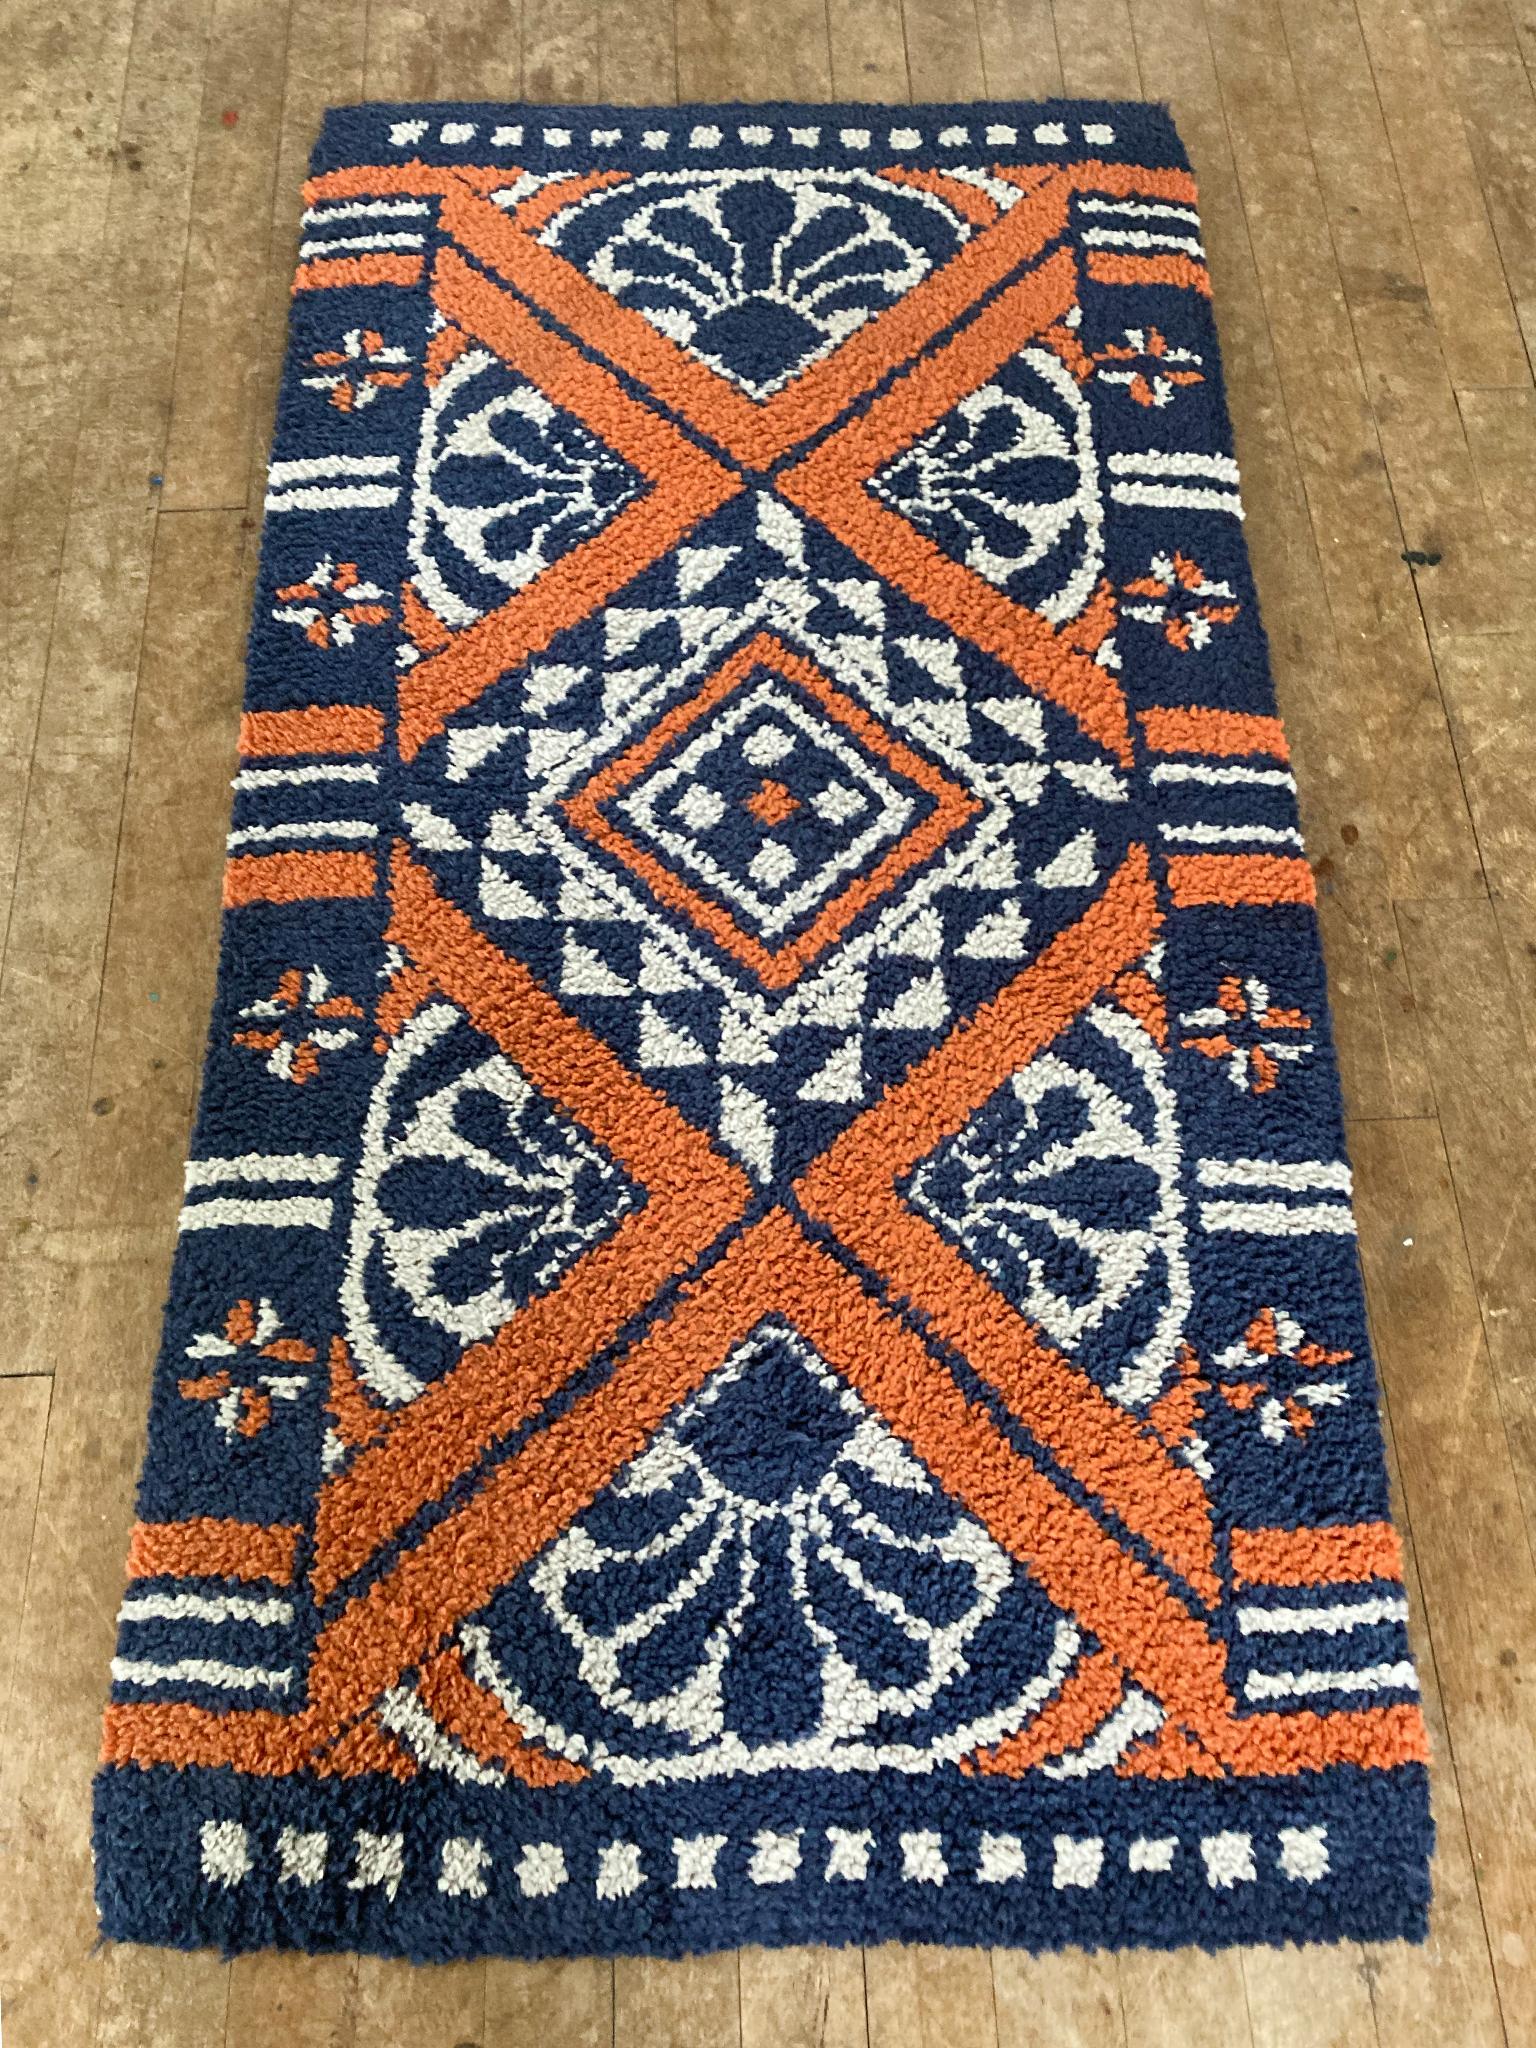 This Danish rya rug is comprised of thick pile wool in a palette of dark blue, orange, and white. The design is a bold composition of geometric shapes and florals.

Dimensions:
5' 9